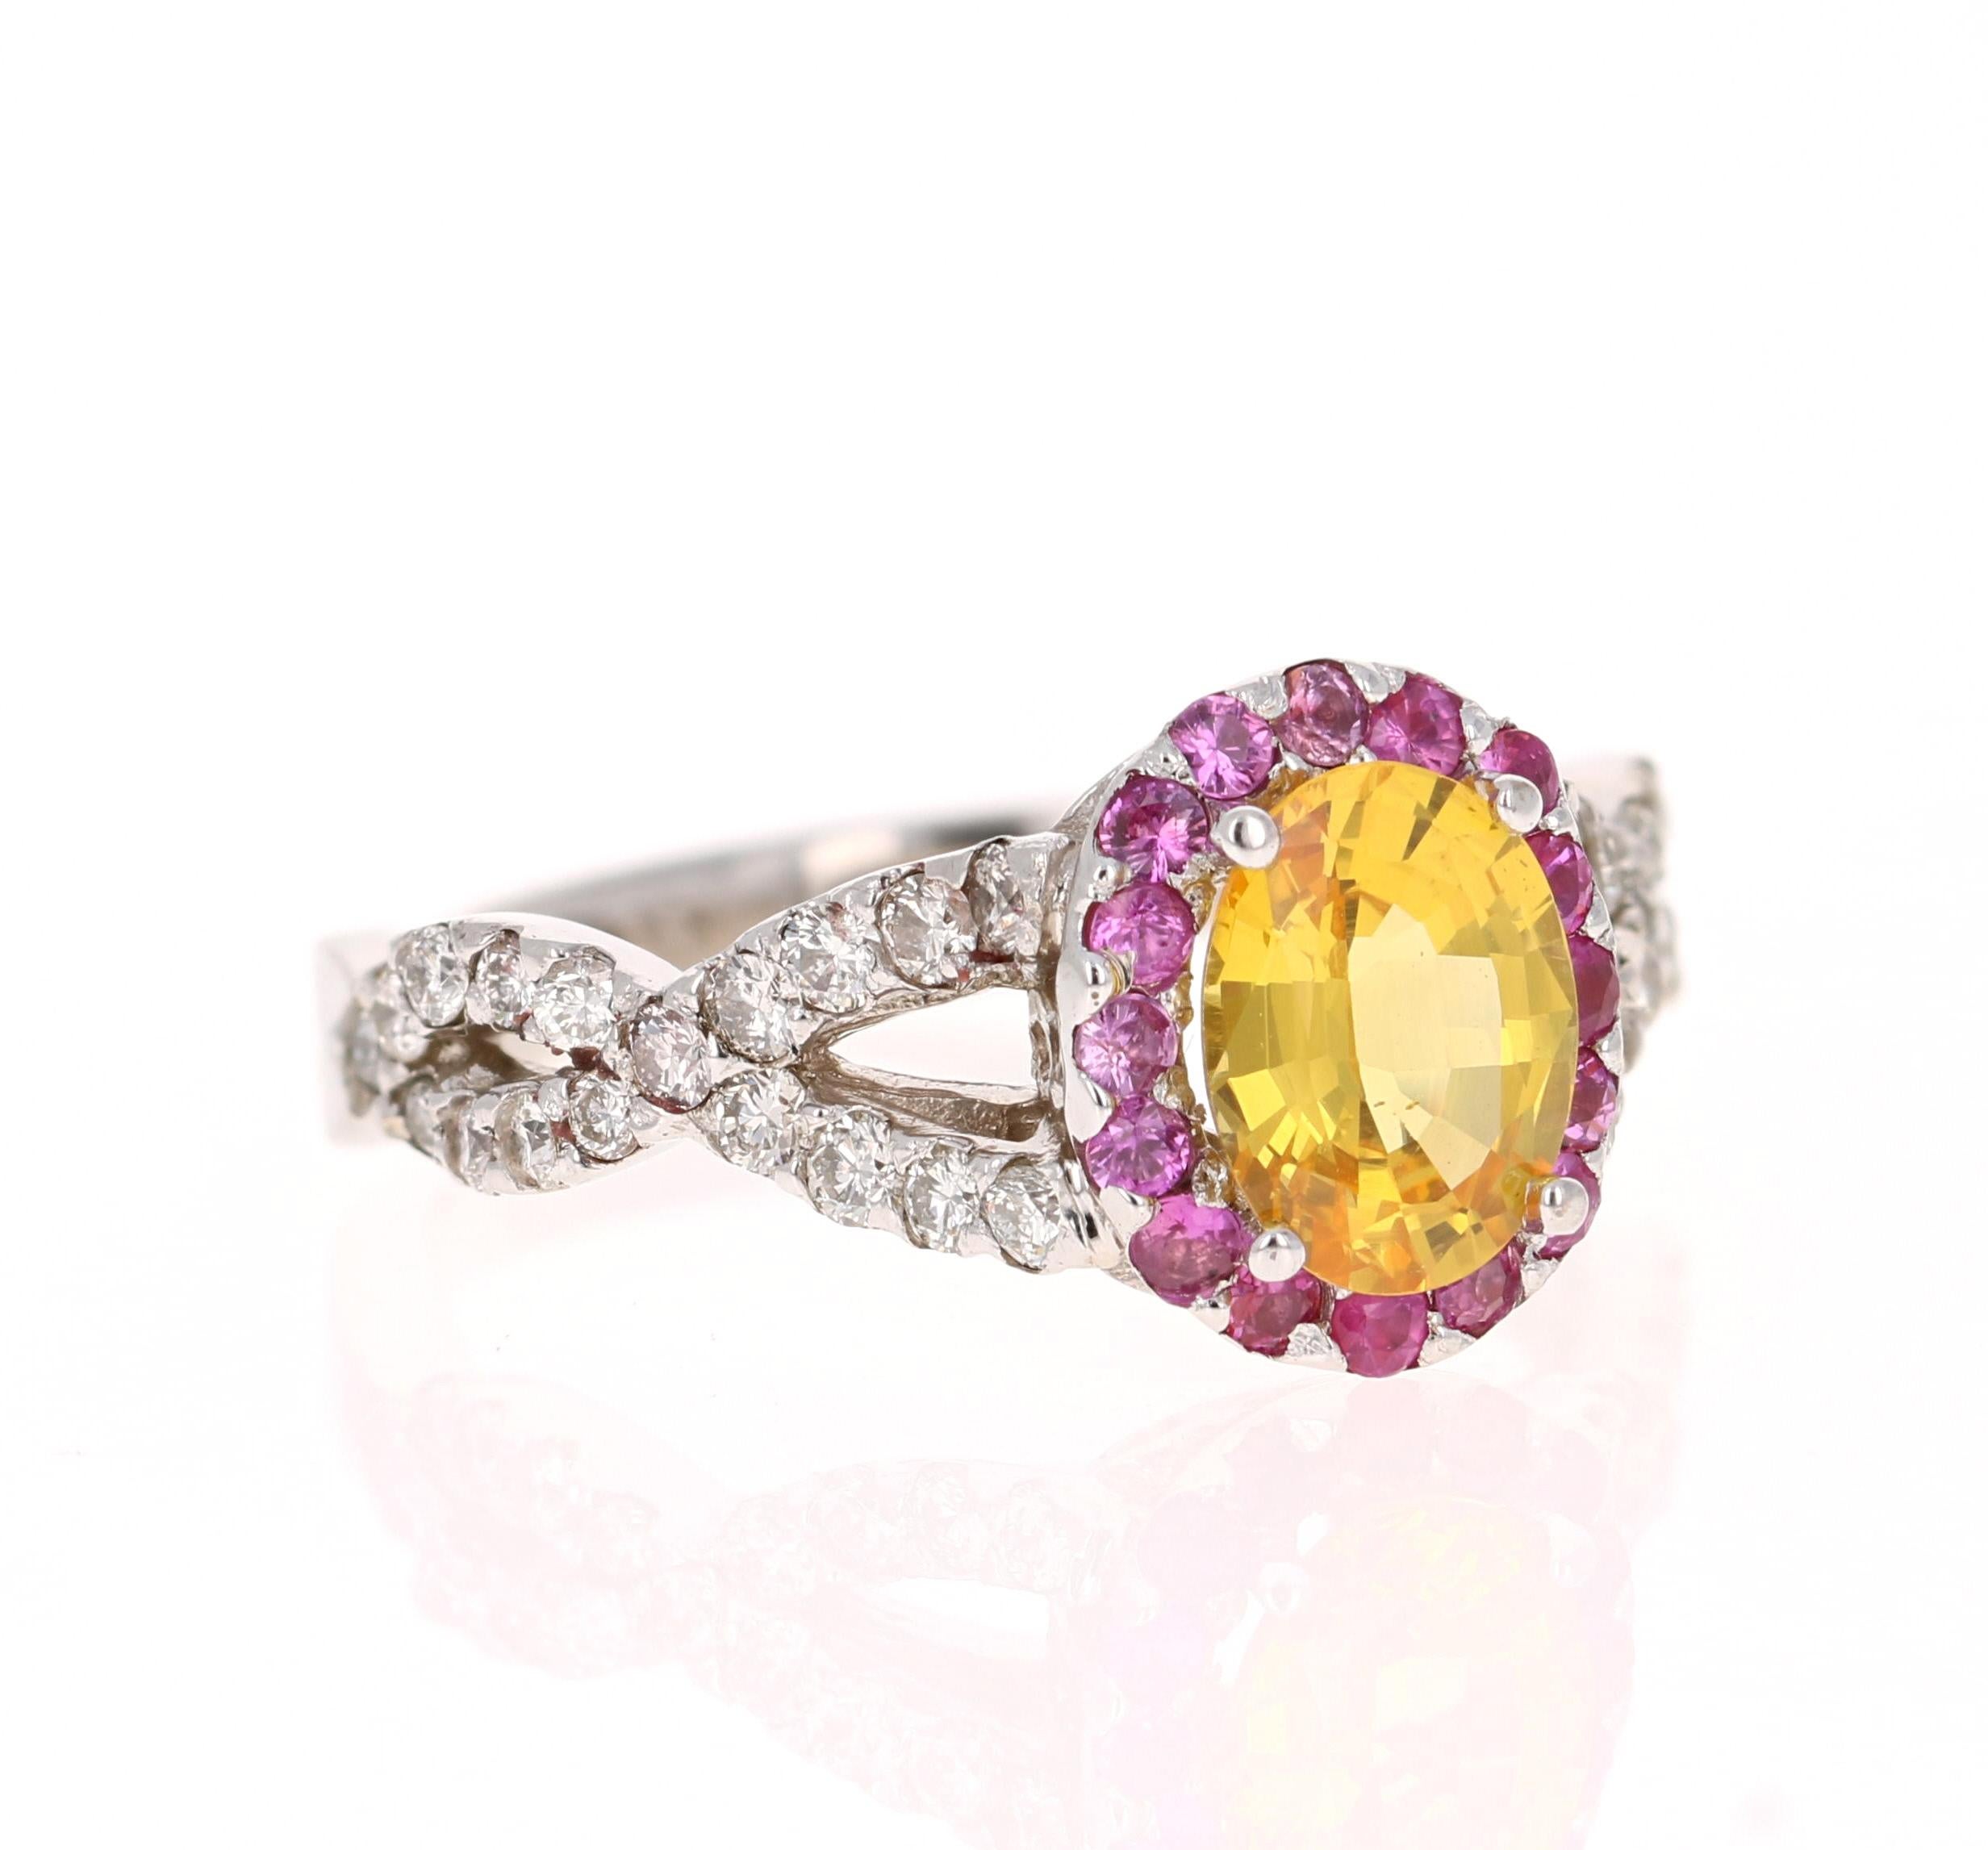 This ring has a 1.28 Carat Oval Cut Natural Yellow Sapphire. 
It has a halo of 17 Pink Sapphires that weigh 0.29 carats (Clarity: SI, Color: F) and 36 Round Cut Diamonds that weigh 0.58 Carats. The total carat weight of the ring is 2.15 Carats. 

It